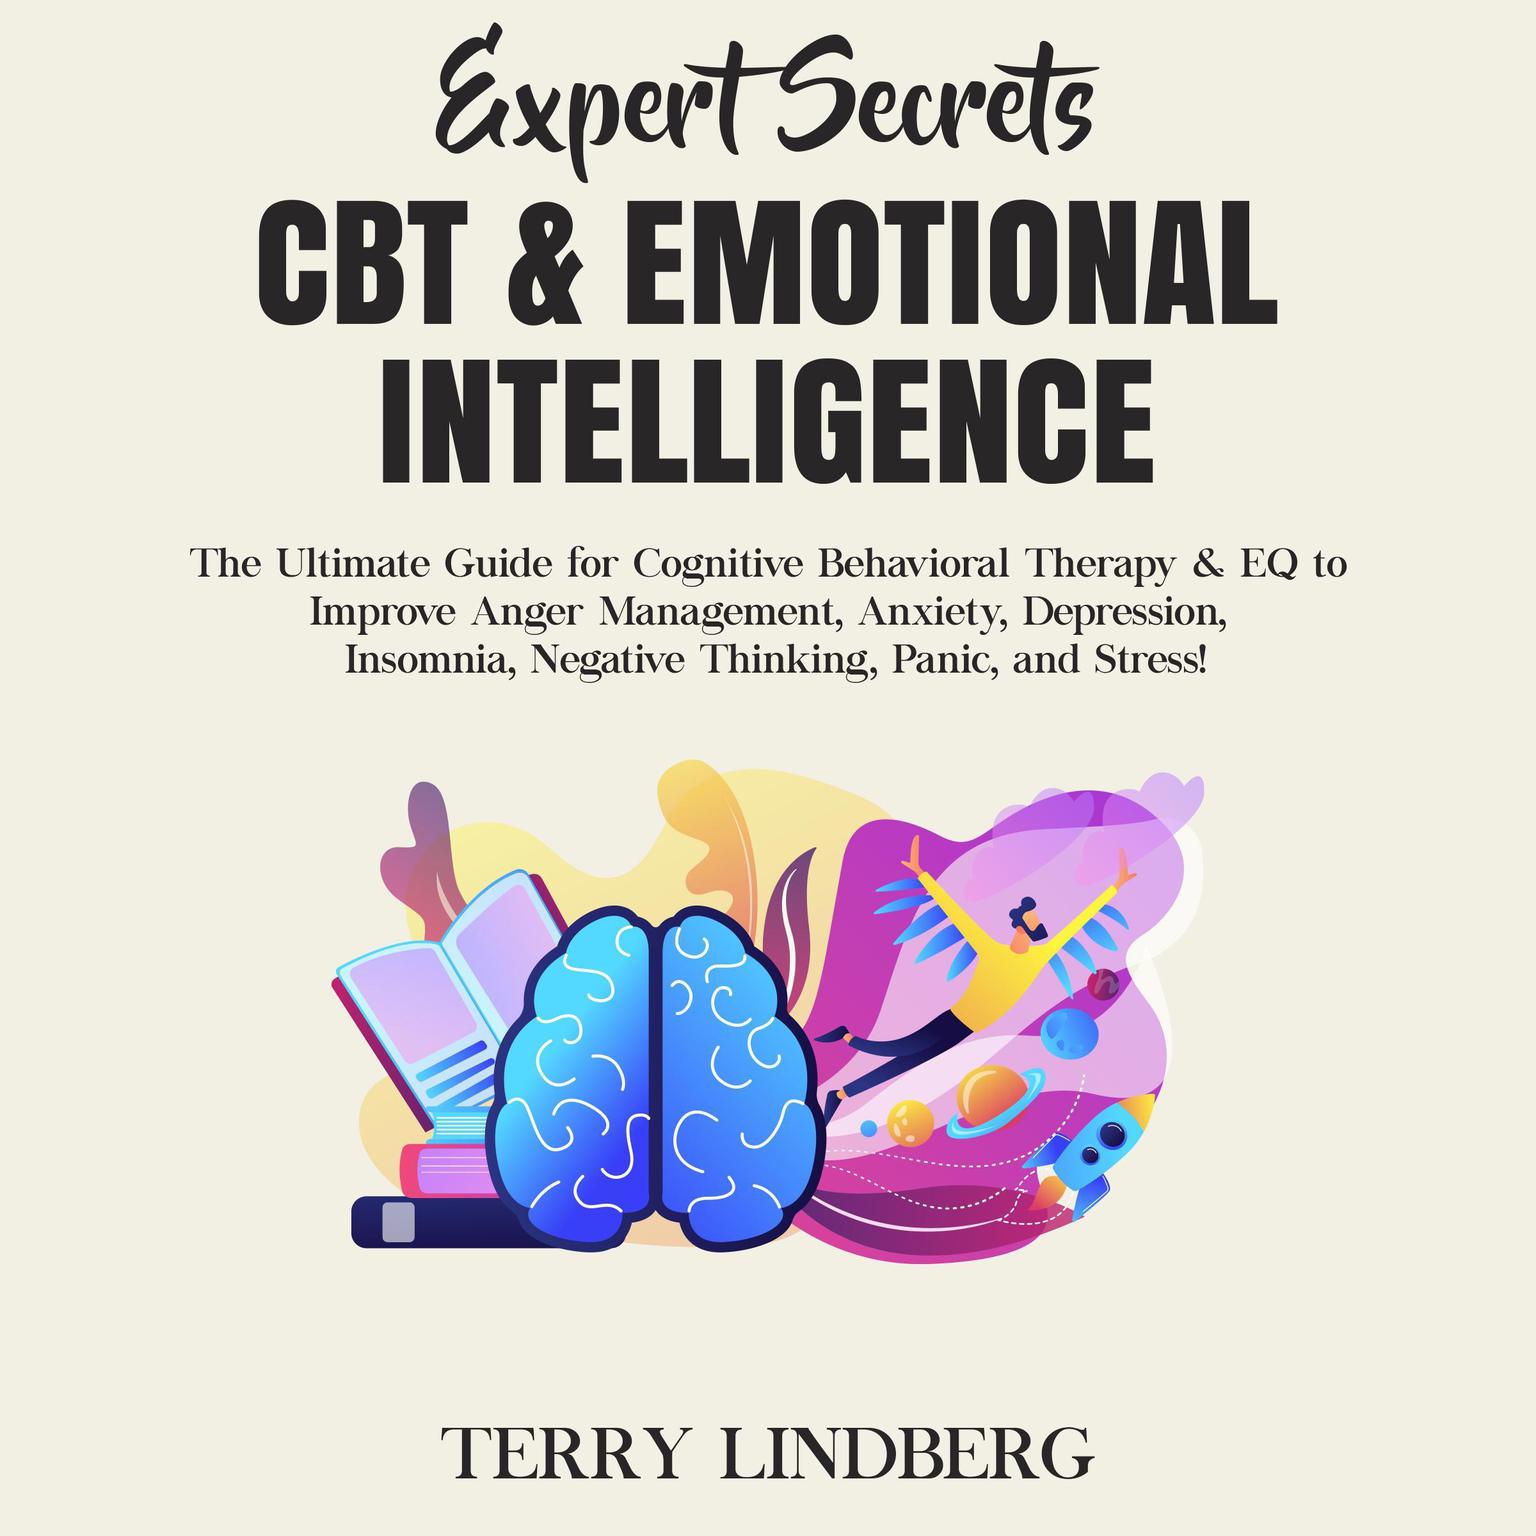 Expert Secrets – CBT & Emotional Intelligence: The Ultimate Guide for Cognitive Behavioral Therapy & EQ to Improve Anger Management, Anxiety, Depression, Insomnia, Negative Thinking, Panic, and Stress! Audiobook, by Terry Lindberg